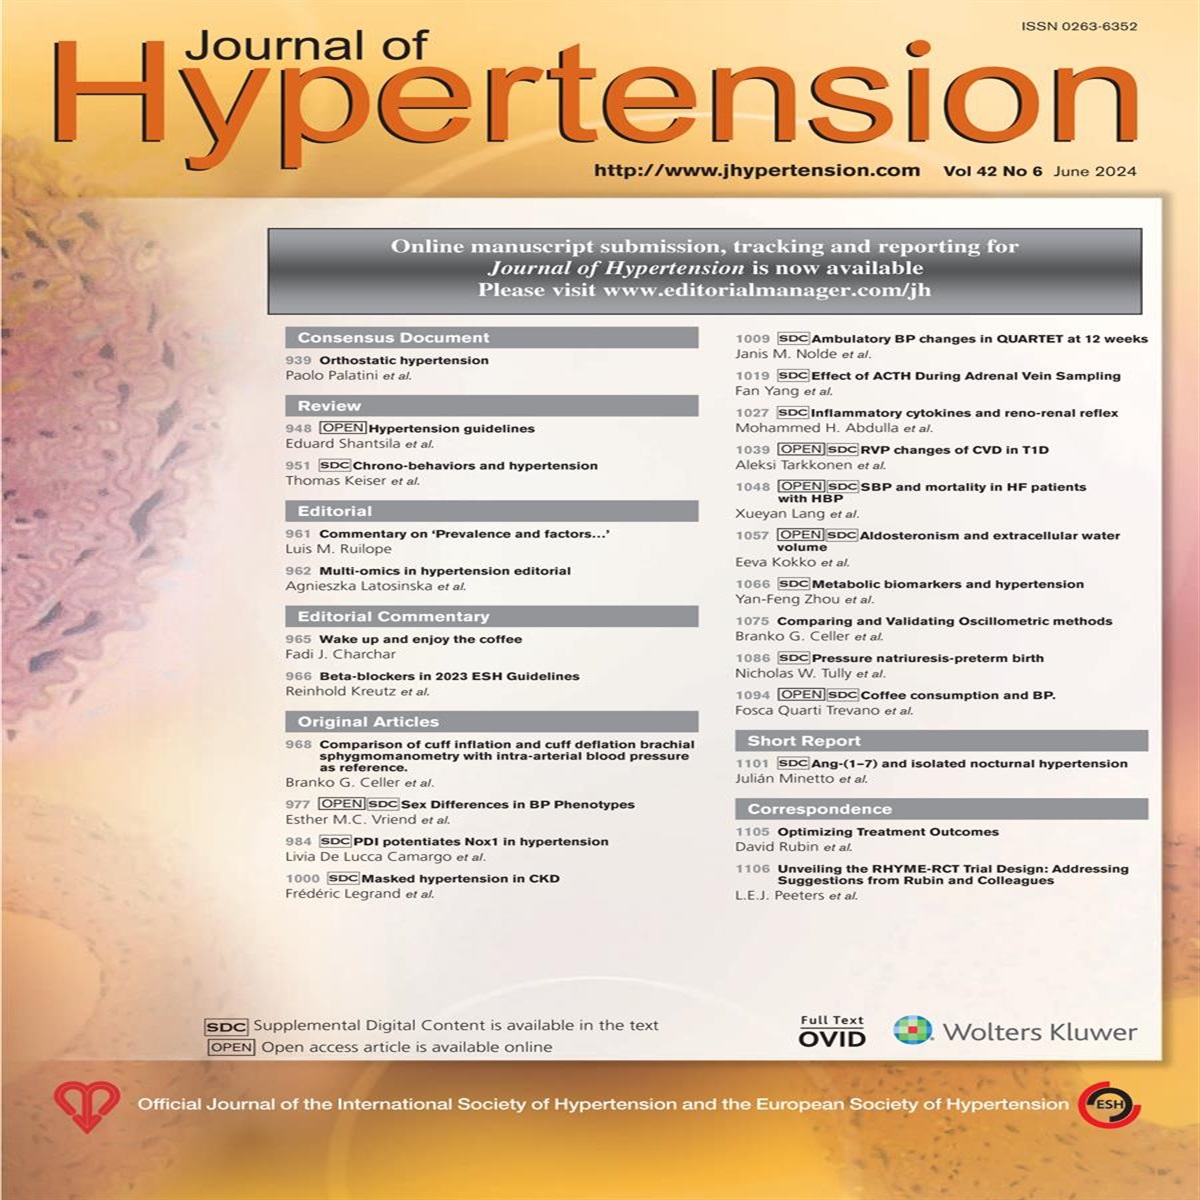 Dietary factors and hypertension risk in West Africa: a systematic review and meta-analysis of observational studies: Erratum